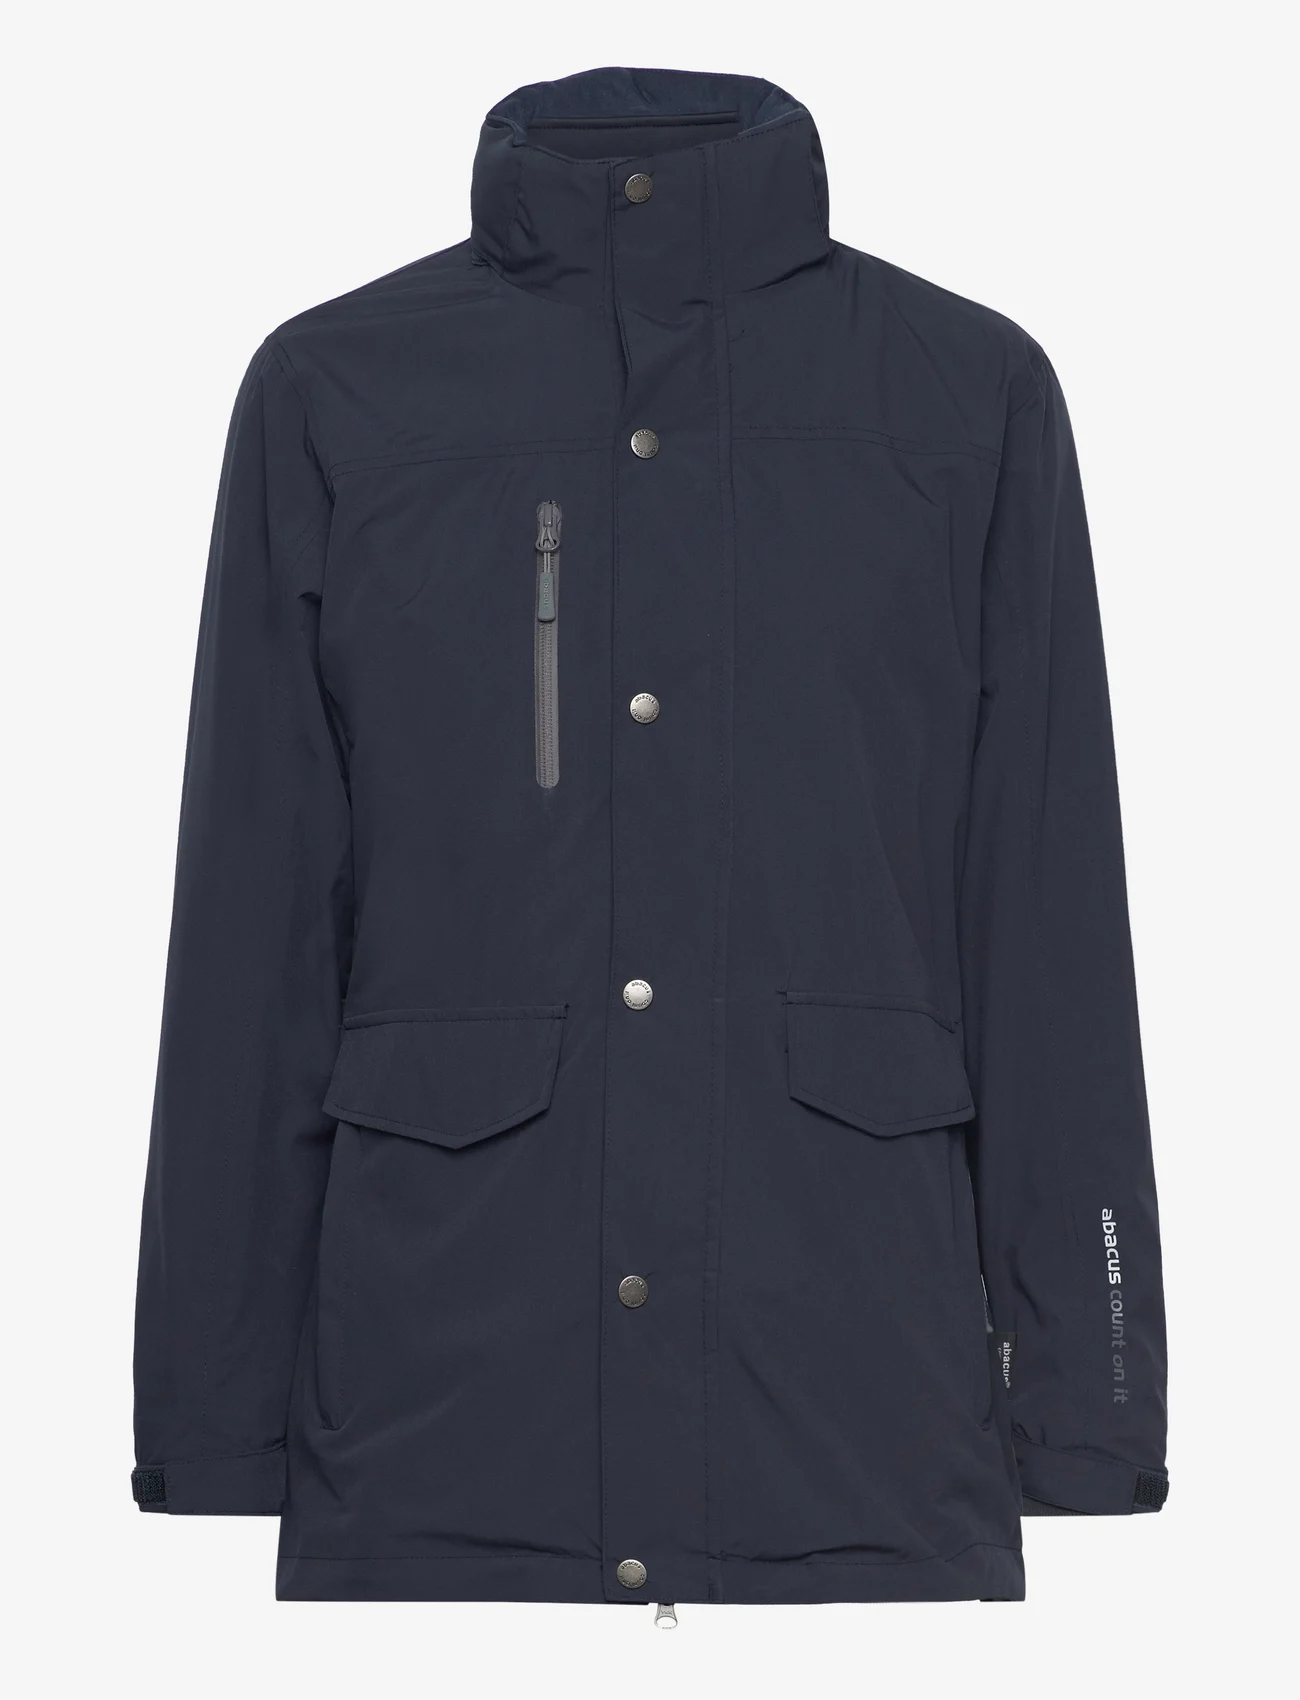 Abacus - Lds Staff 3 in1 jacket - parka's - navy - 0